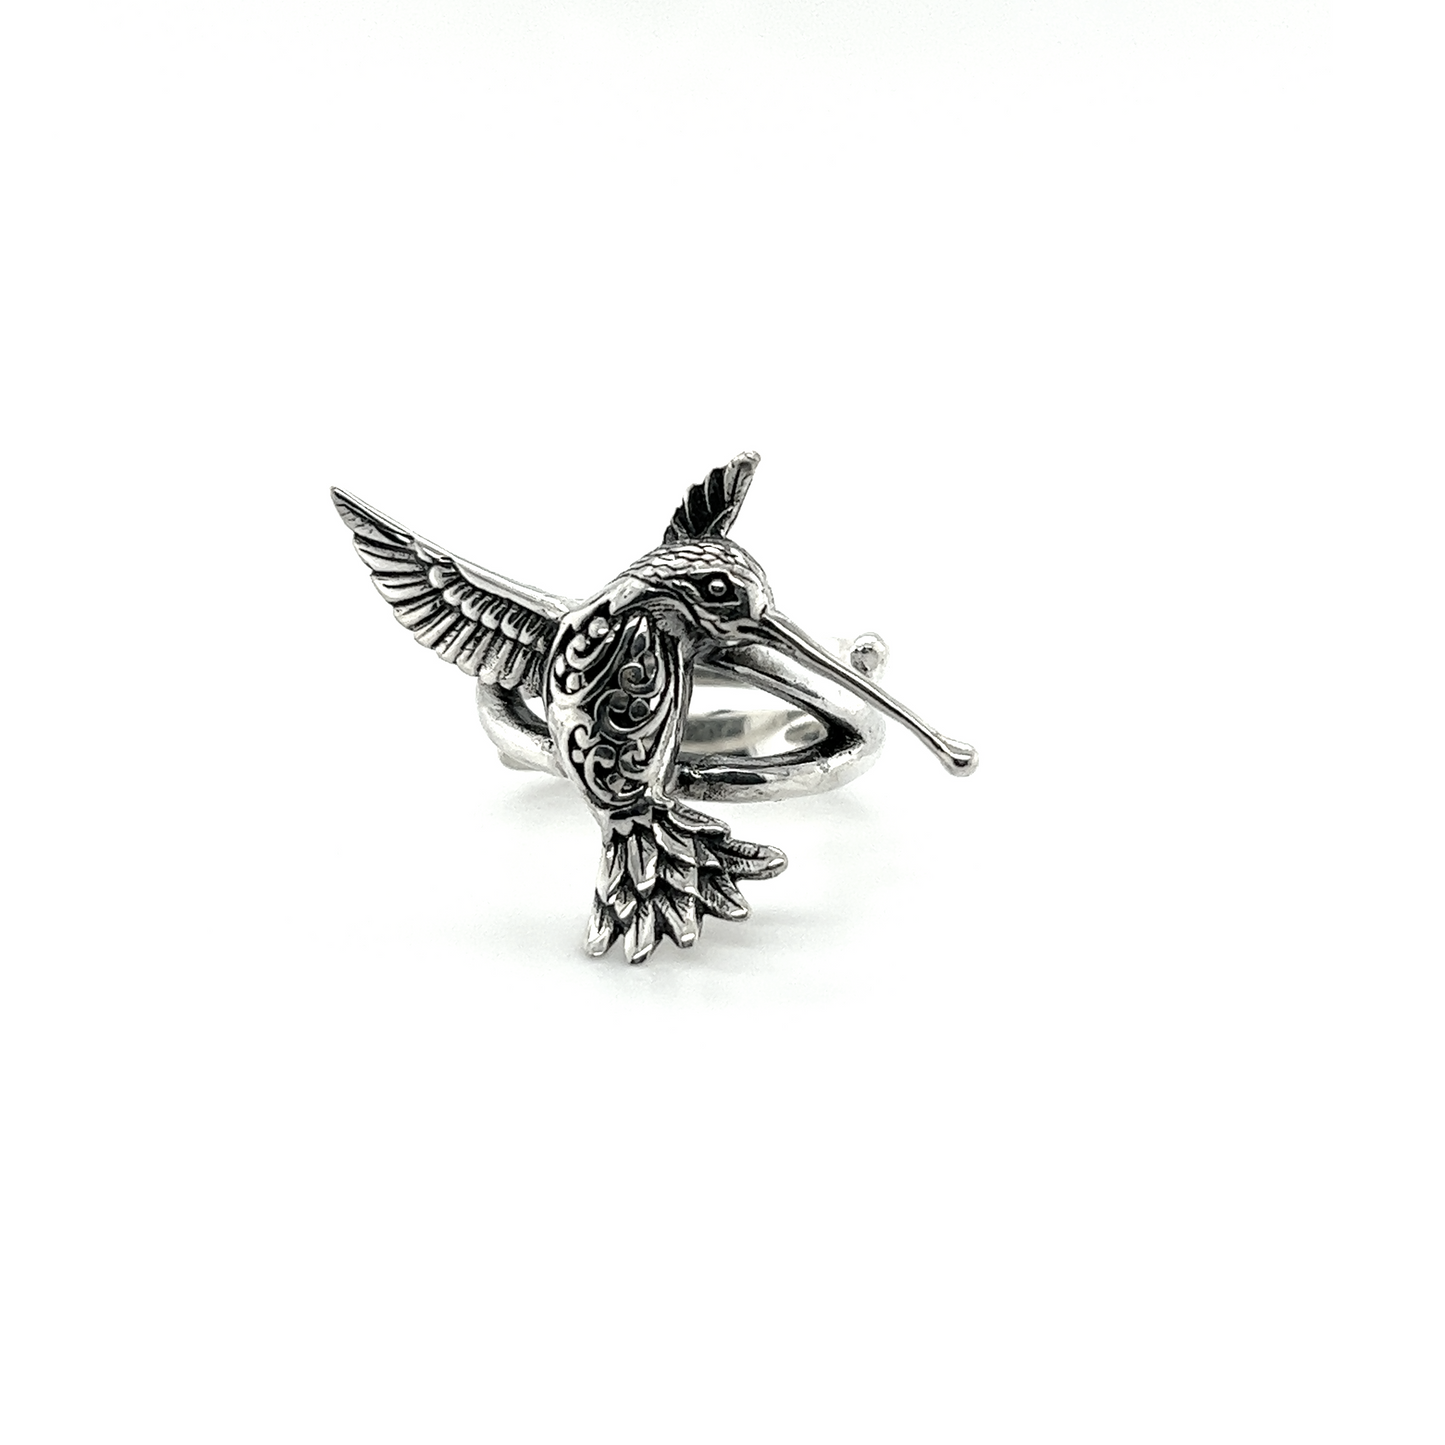 An exquisite artisan silver Filigree Hummingbird Ring, showcased against a pristine white background.